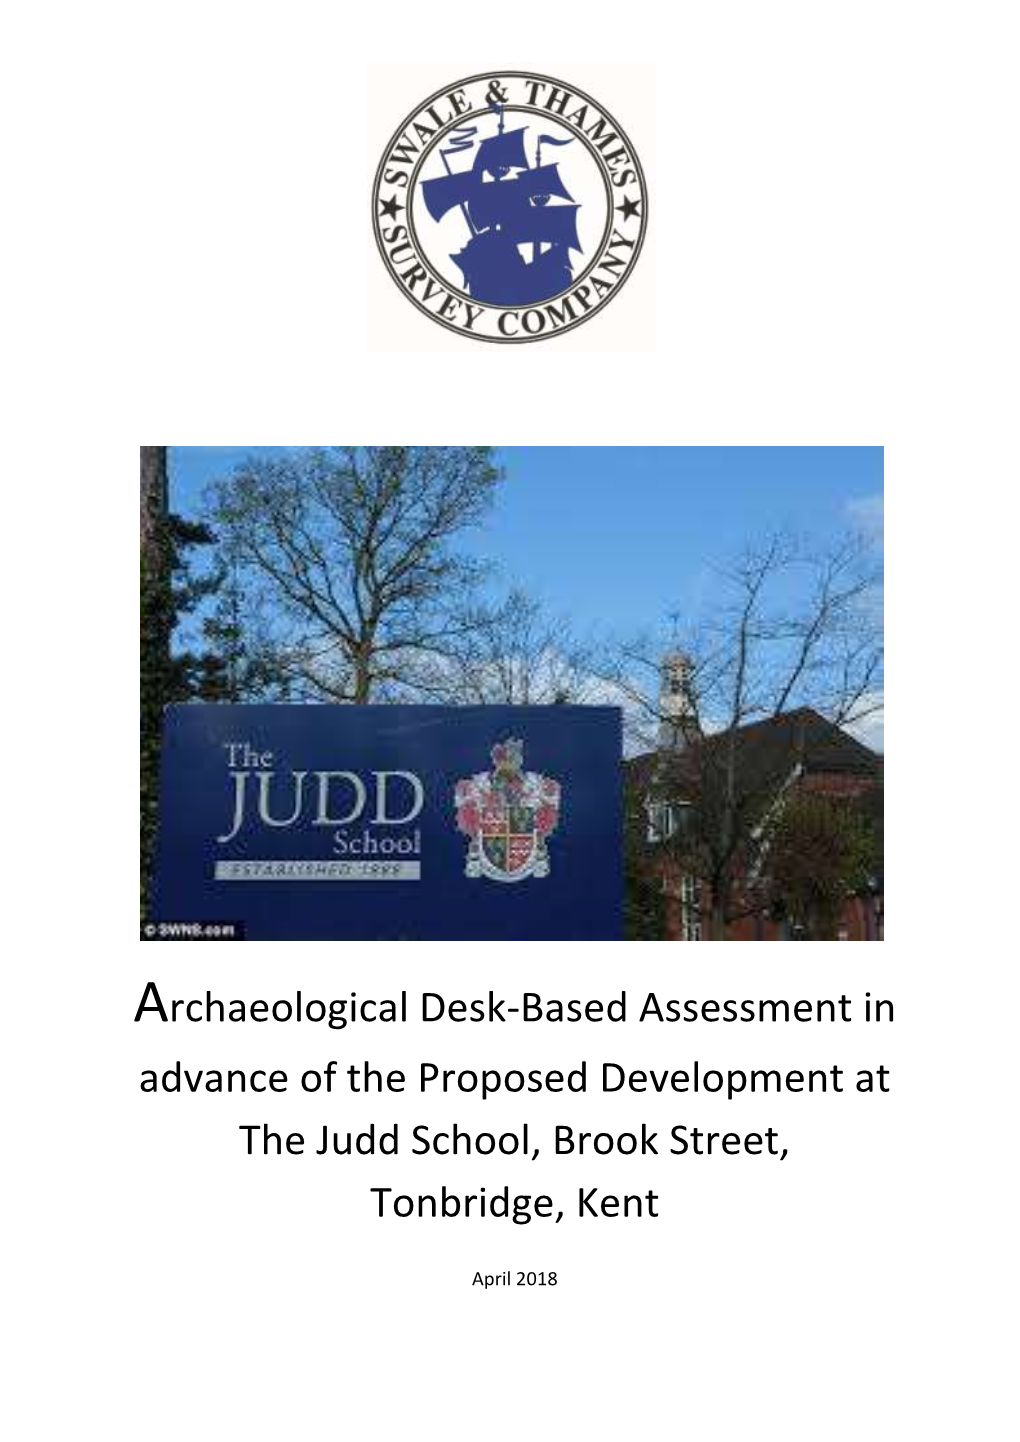 Archaeological Desk-Based Assessment in Advance of the Proposed Development at the Judd School, Brook Street, Tonbridge, Kent